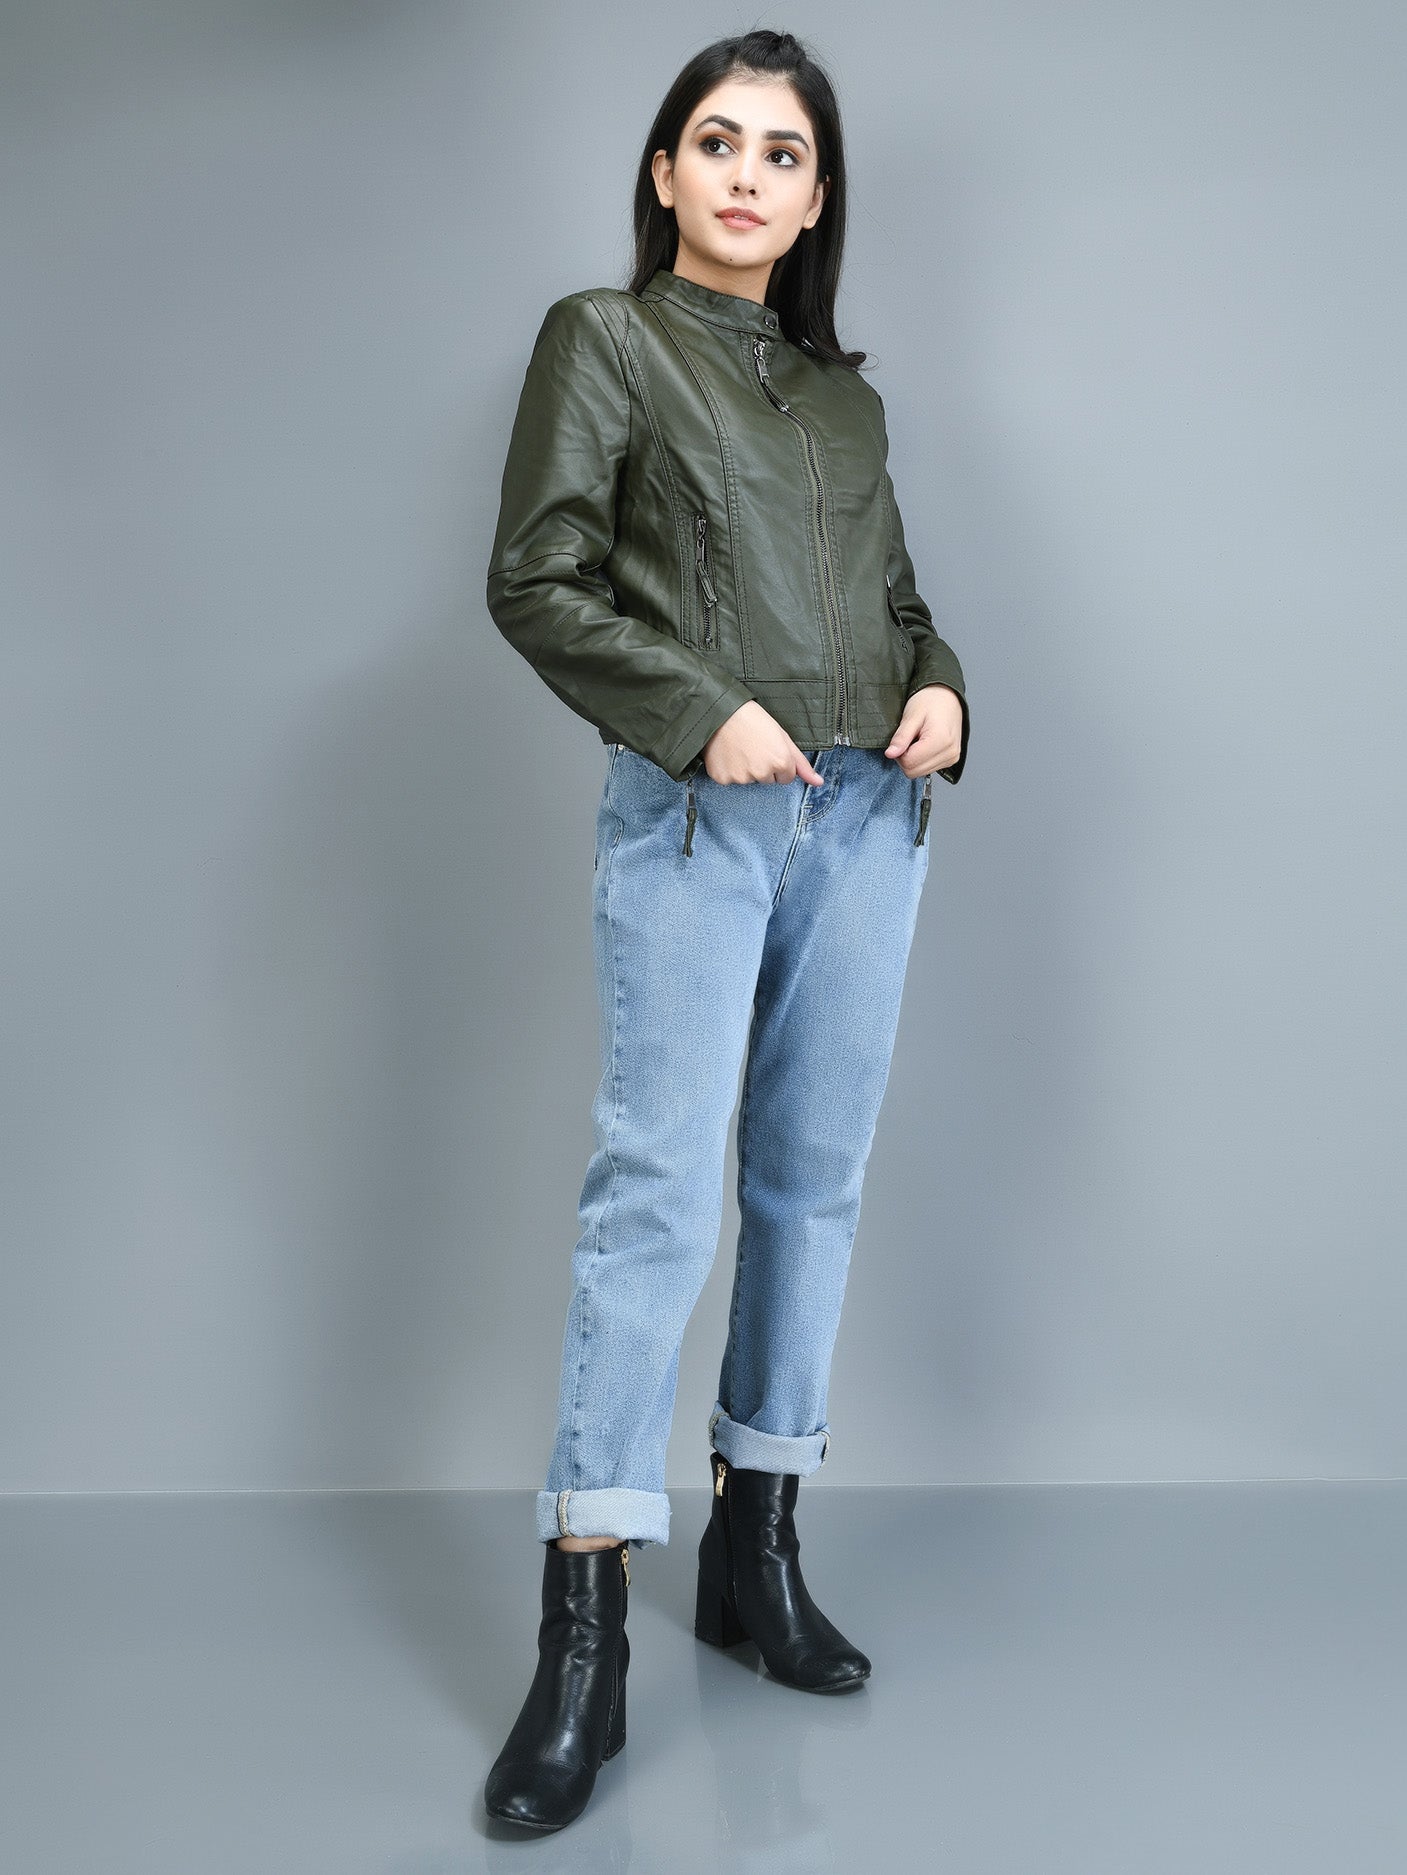 Classic Leather Jacket - Army green